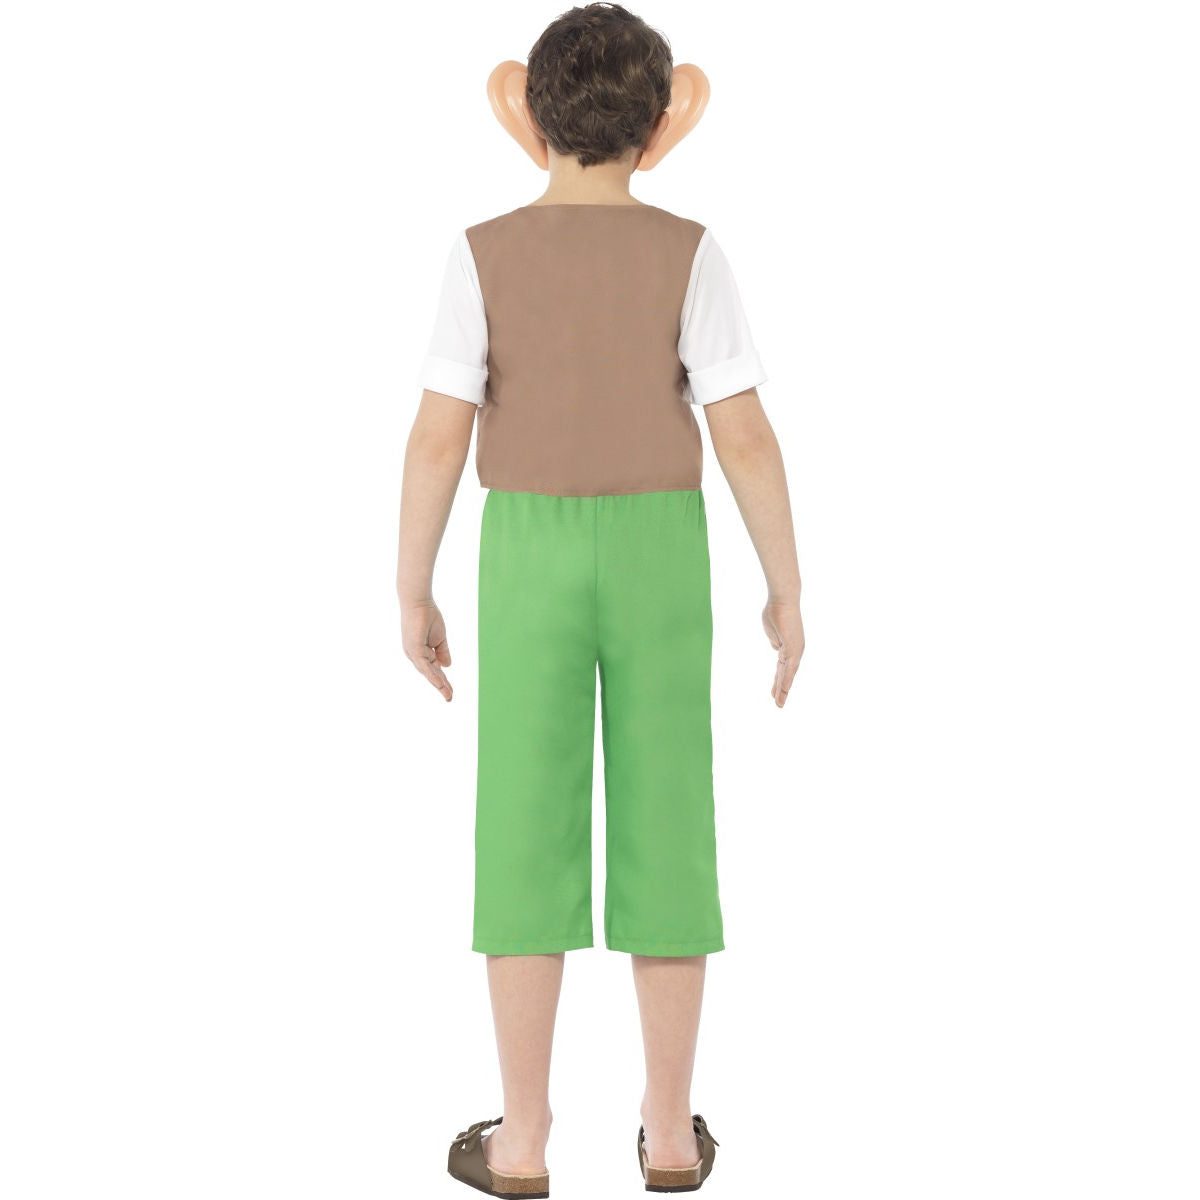 Roald Dahl BFG Children's Costume with large ears and horn